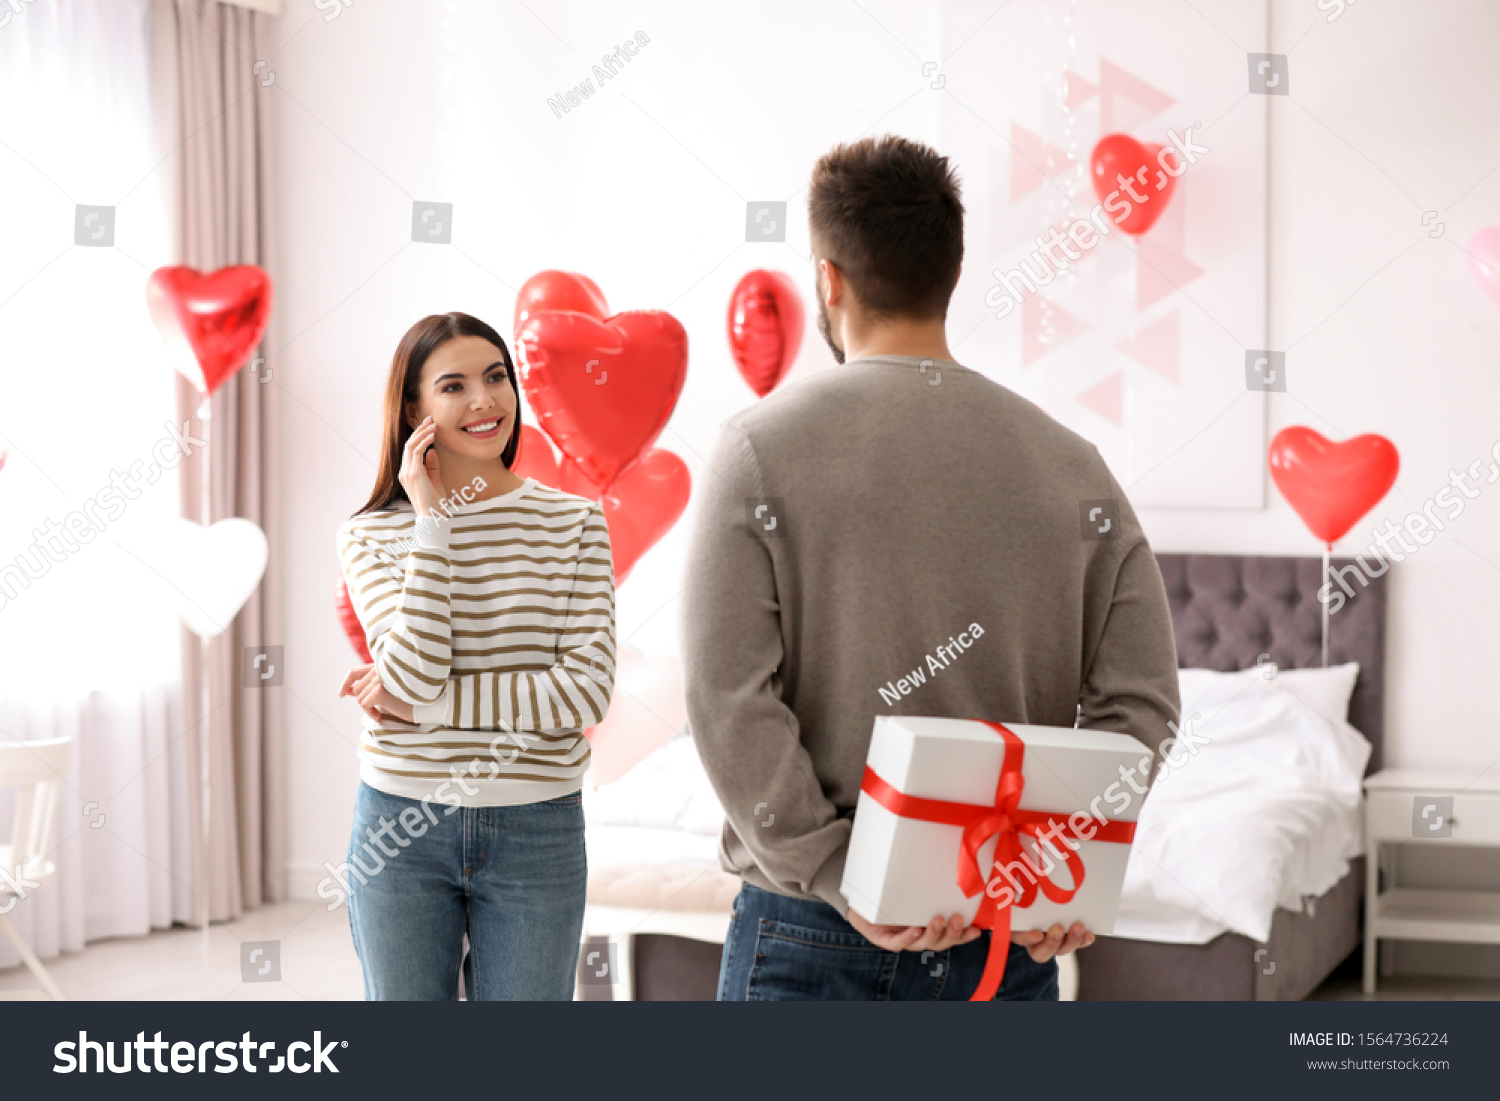 Young man presenting gift to his girlfriend in bedroom decorated with heart shaped balloons. Valentine's day celebration #1564736224